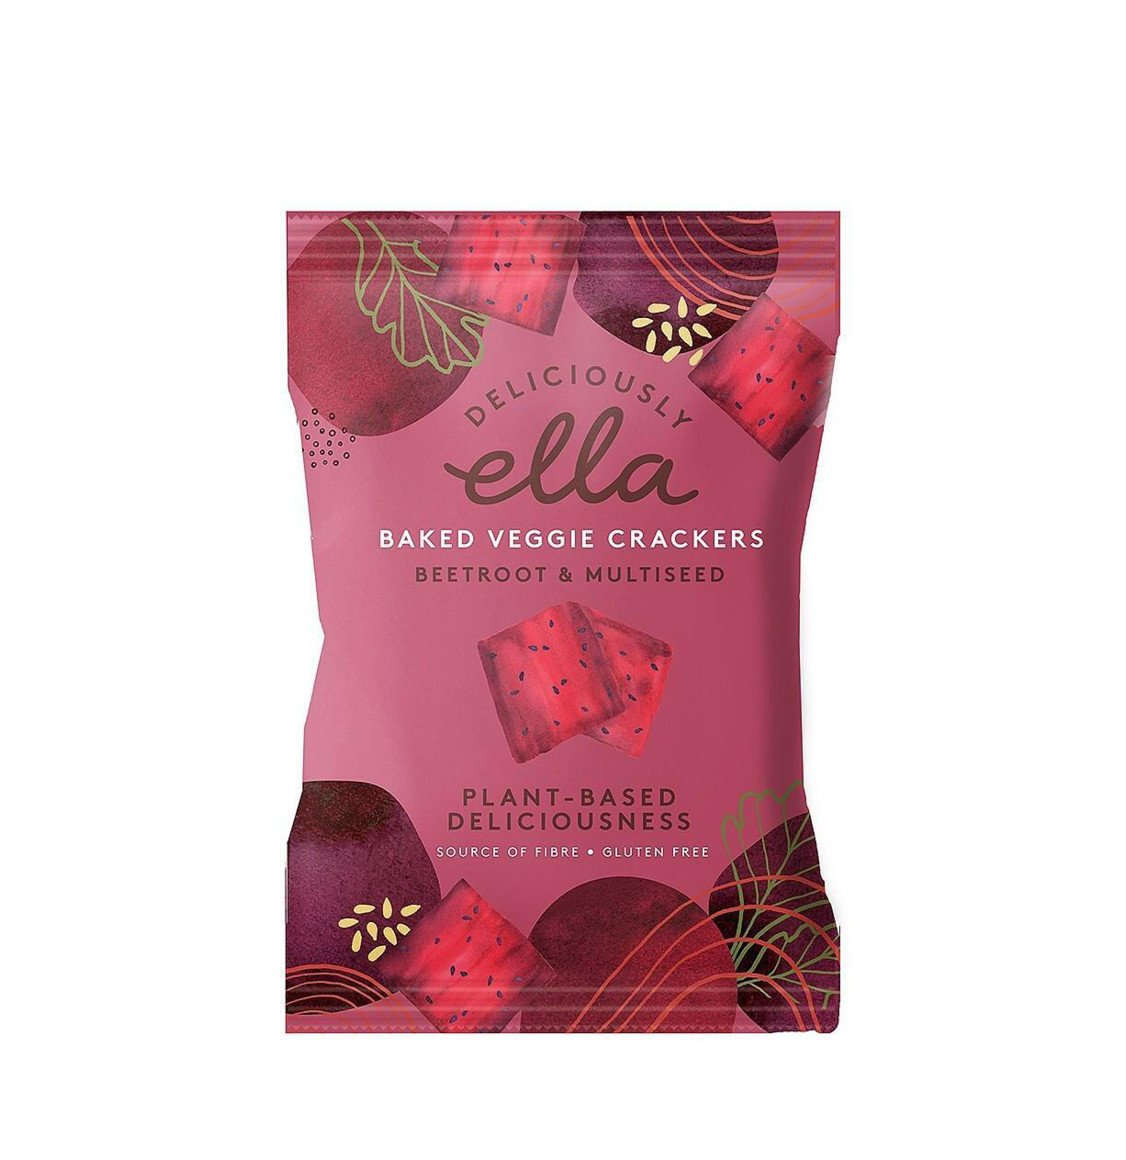 Deliciously Ella Beetroot And Multiseed Baked Veggie Crackers 100g